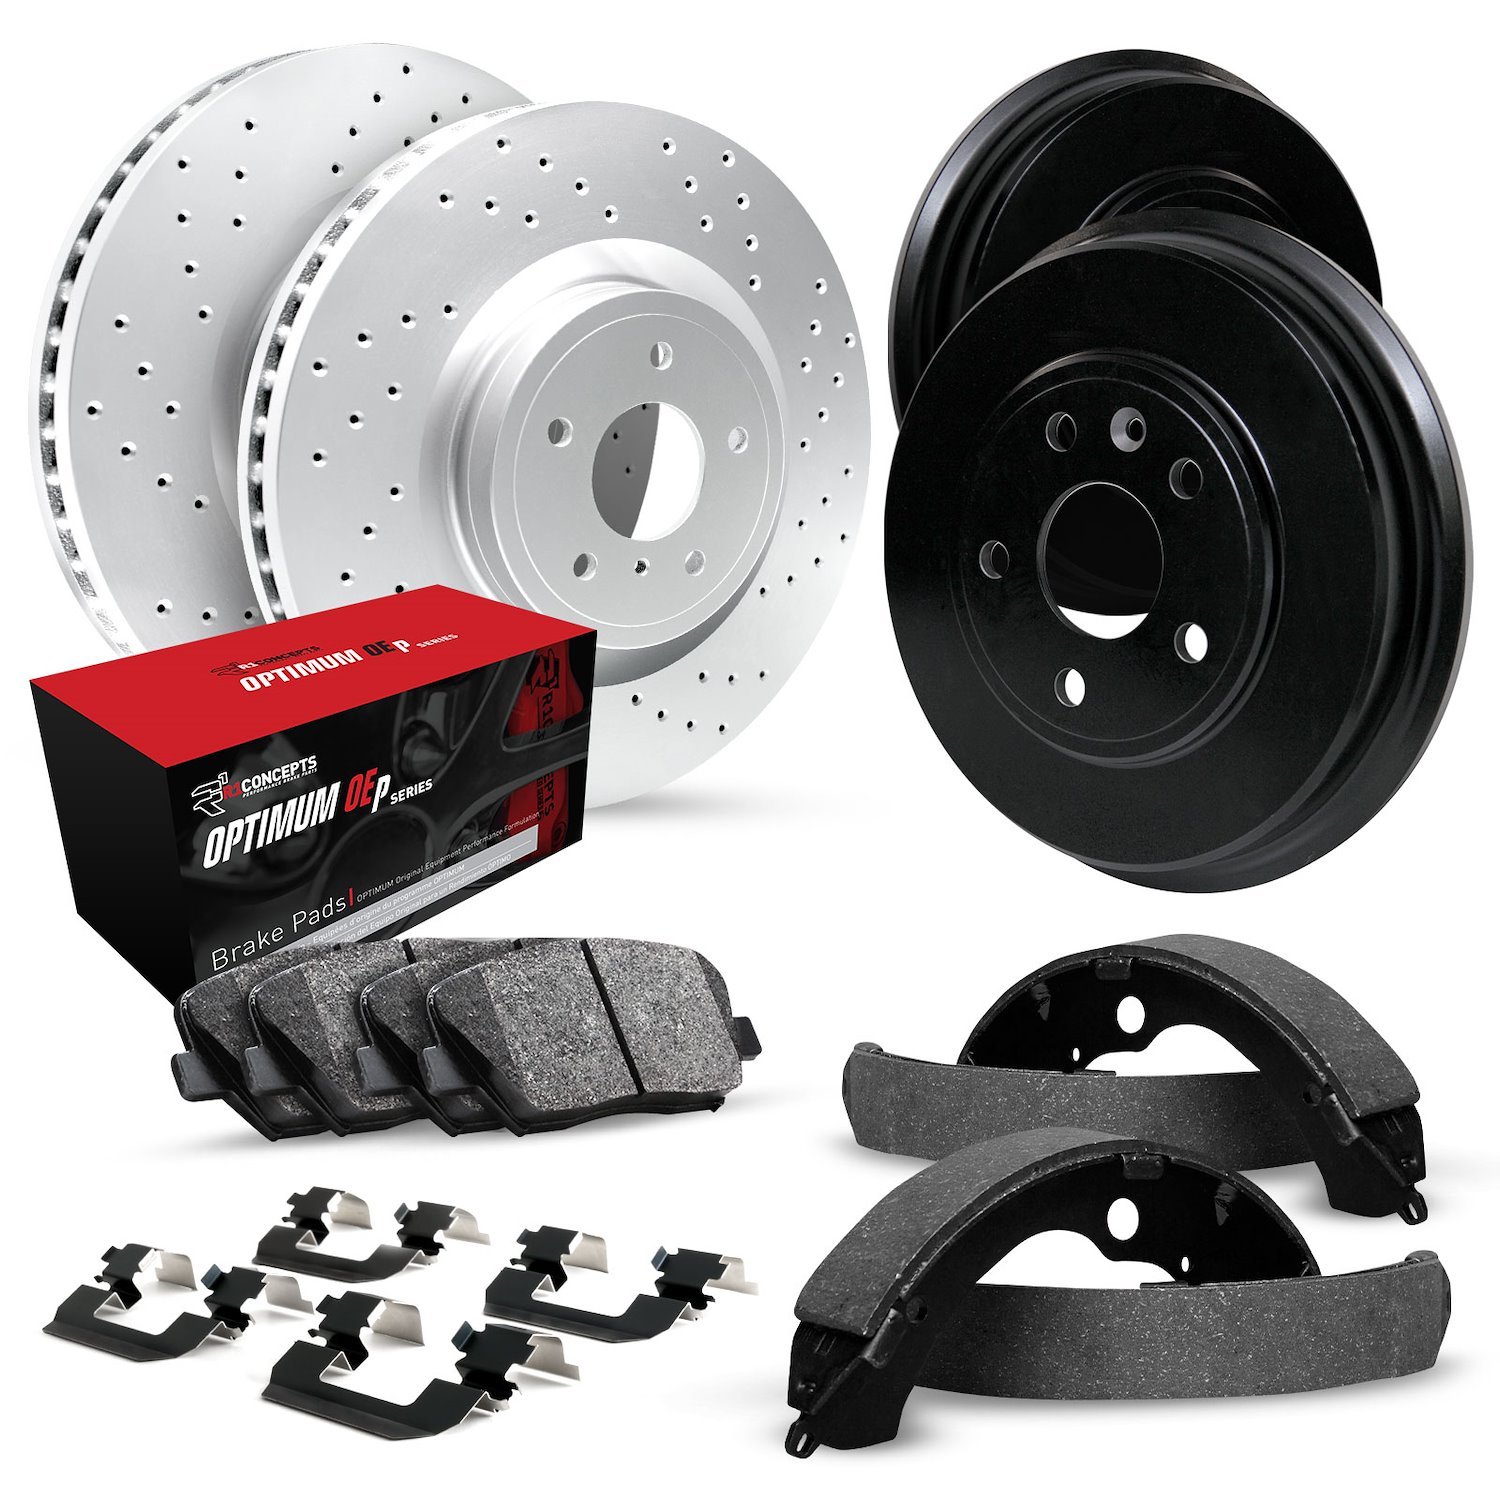 GEO-Carbon Drilled Brake Rotor & Drum Set w/Optimum OE Pads, Shoes, & Hardware, 1990-1992 GM, Position: Front & Rear